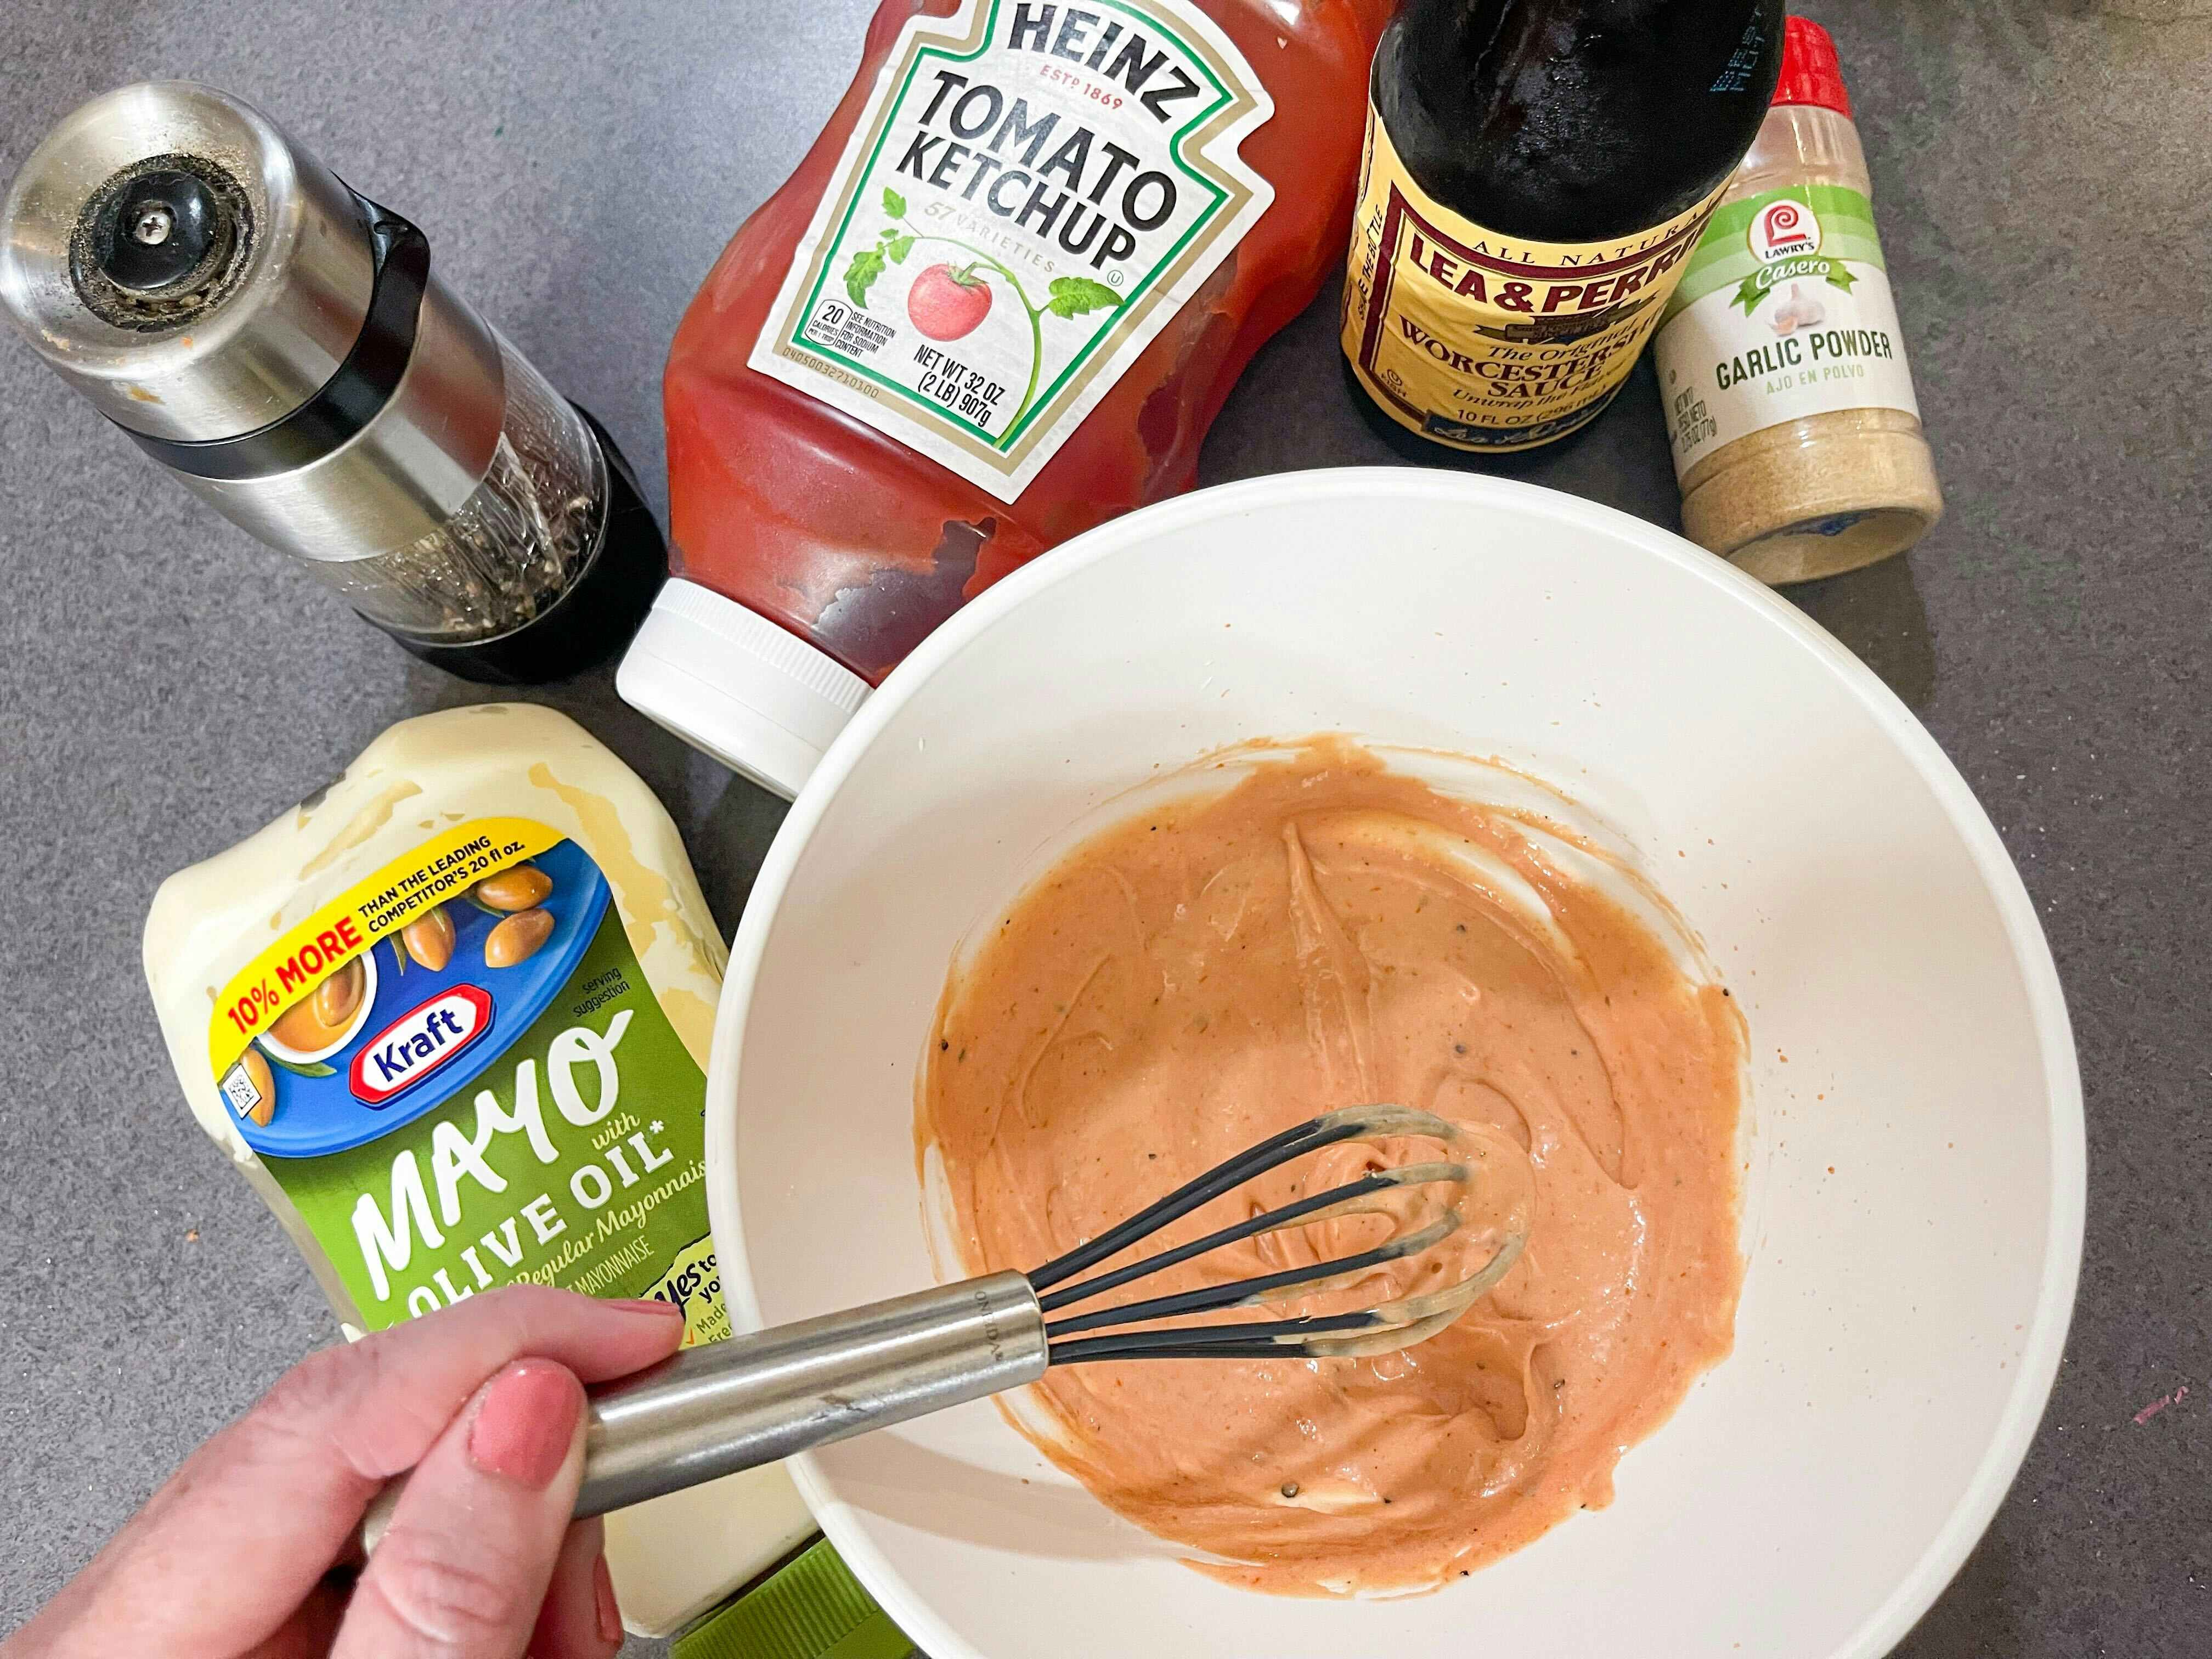 A mixing bowl with homemade sauce with mayo, black pepper, ketchup, Worcestershire sauce, and garlic powder, with a person whisking it 